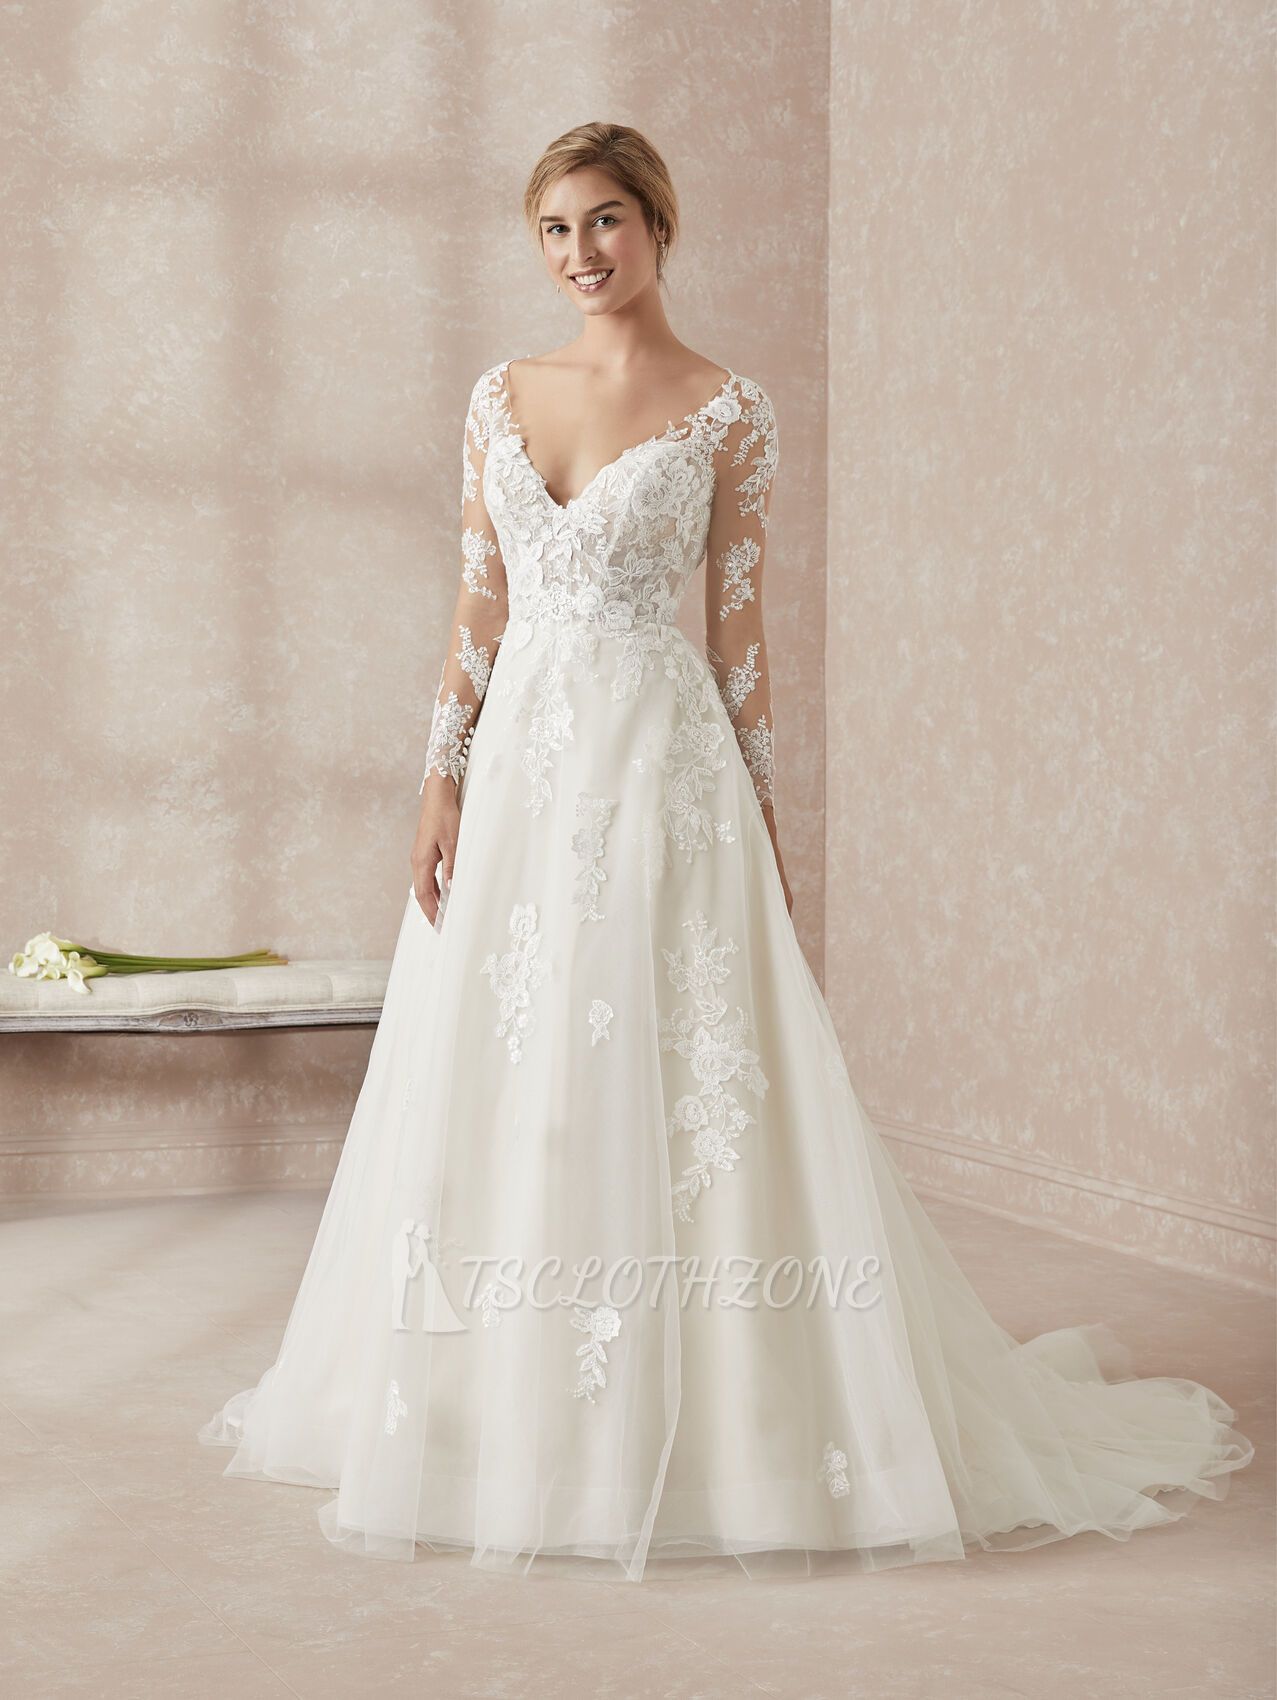 Elegant Long Sleeves White Floor-Length Wedding Dress With Lace Appliques